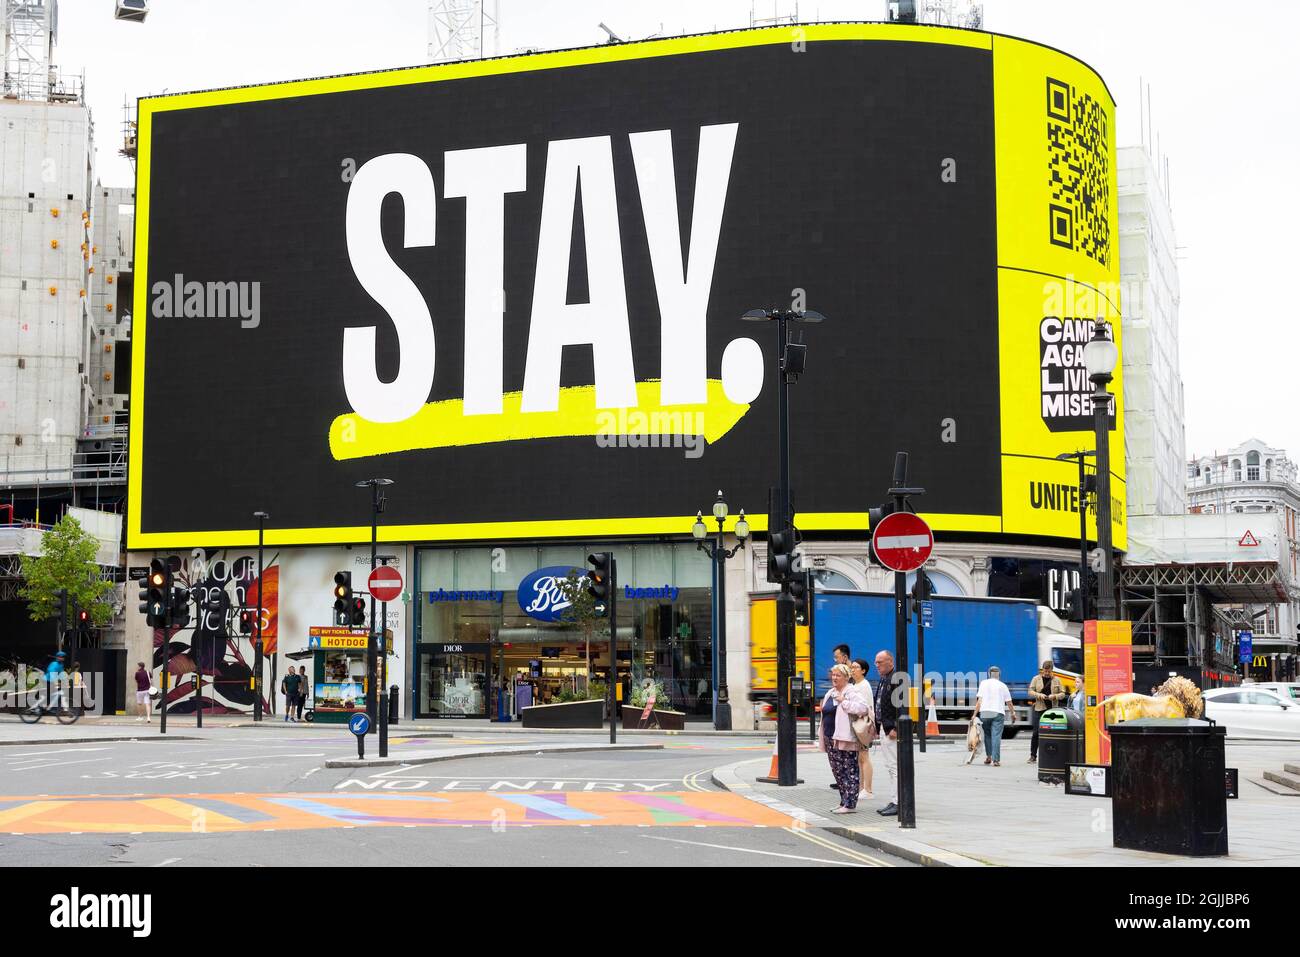 EDITORIAL USE ONLY The word 'STAY' features on the Piccadilly Circus Lights as part of a new campaign to mark World Suicide Prevention Day on Friday, September 10, by Campaign Against Living Miserably (CALM), London. Picture date: Friday, September 10, 2021. Stock Photo